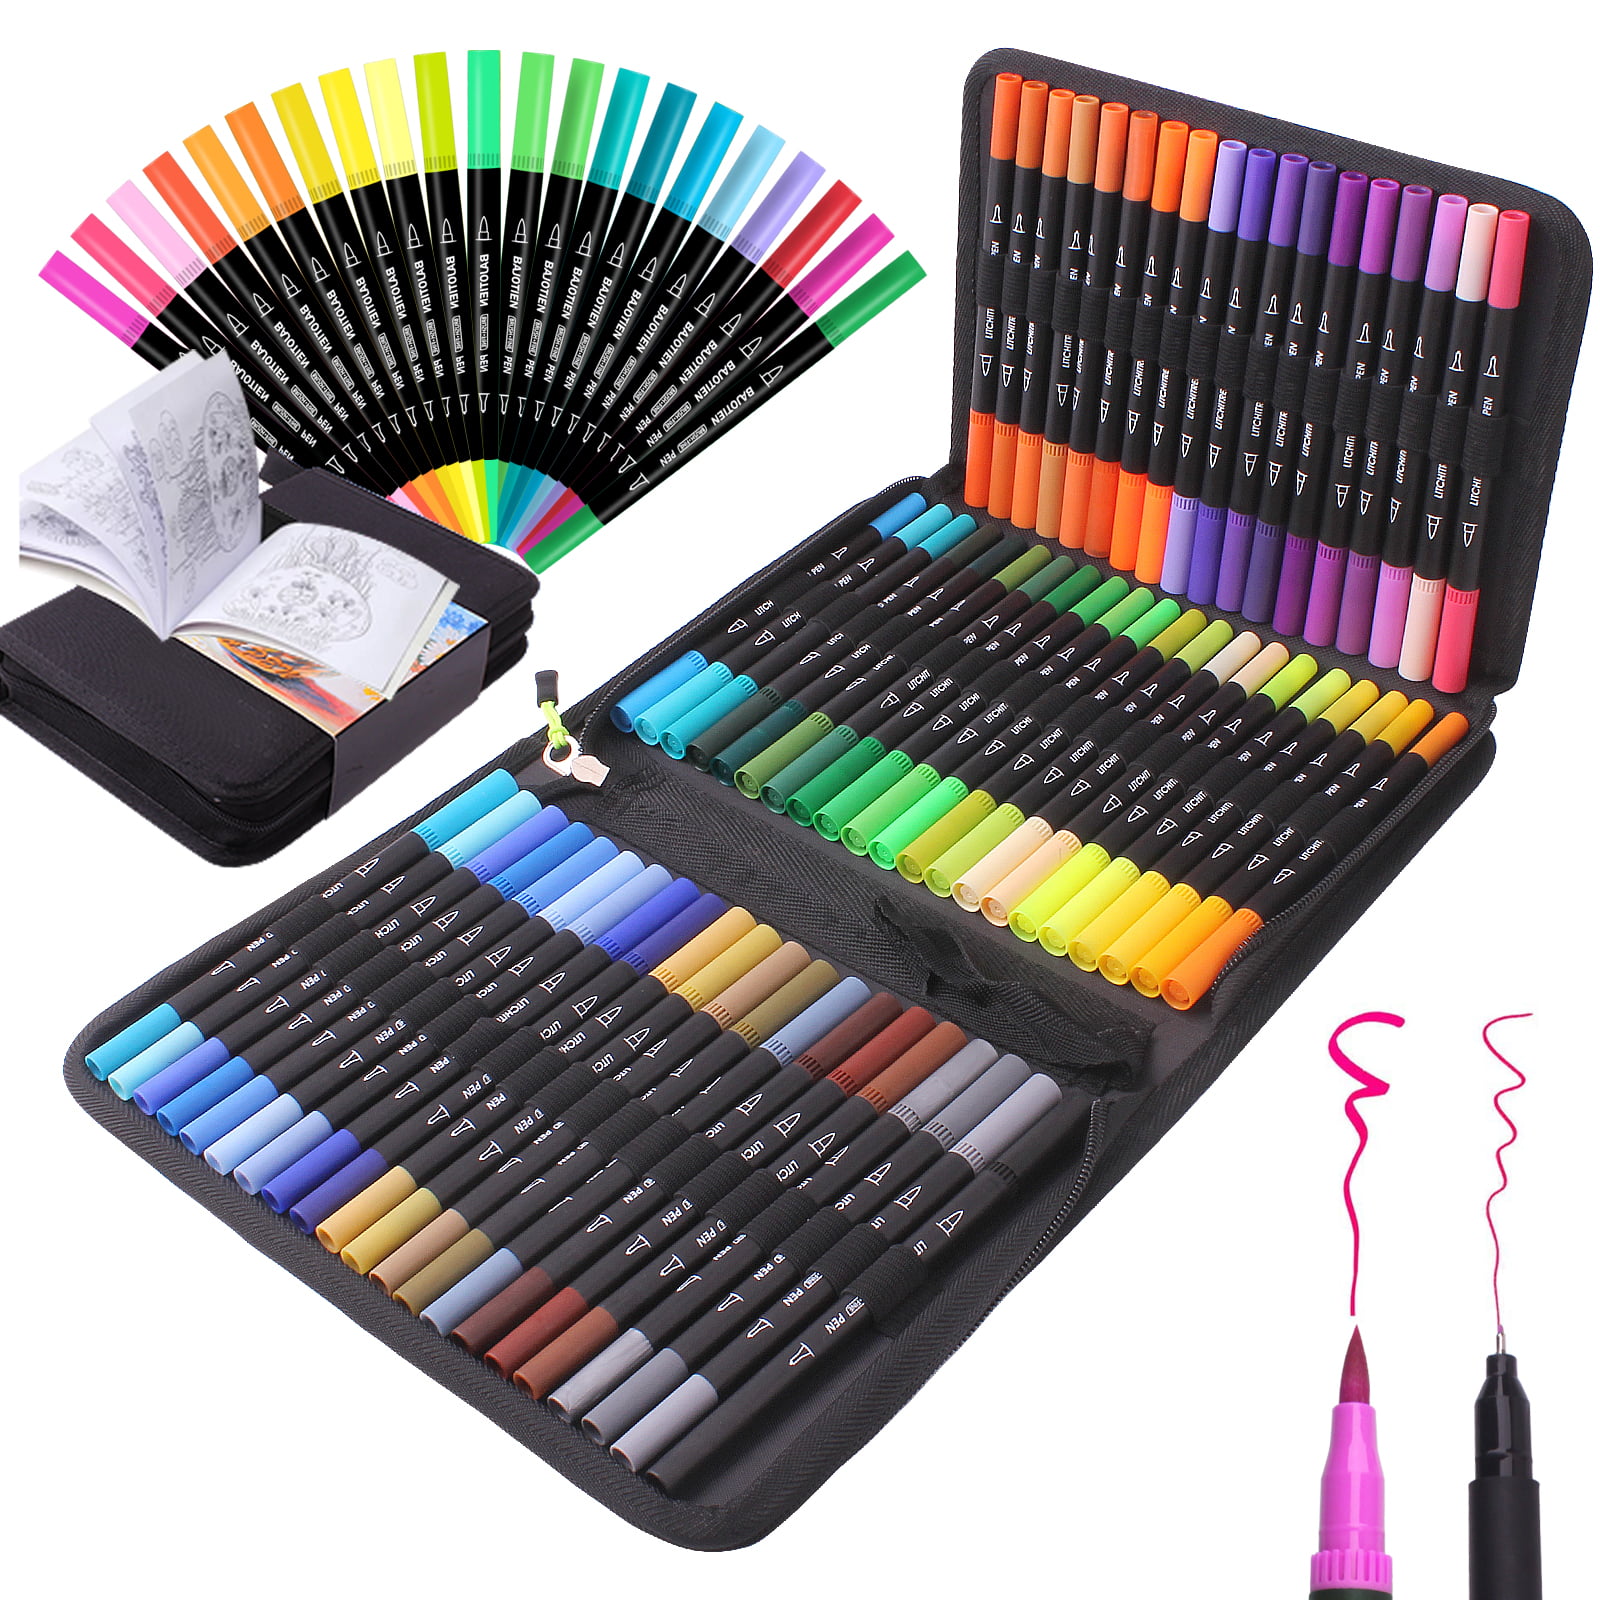  Upanic Brush Markers for Adults Coloring,36 Colors Art Markers  Colored Pens for Bullet Journaling Note Taking Drawing Calligraphy  Lettering,Art School Supplies : Arts, Crafts & Sewing